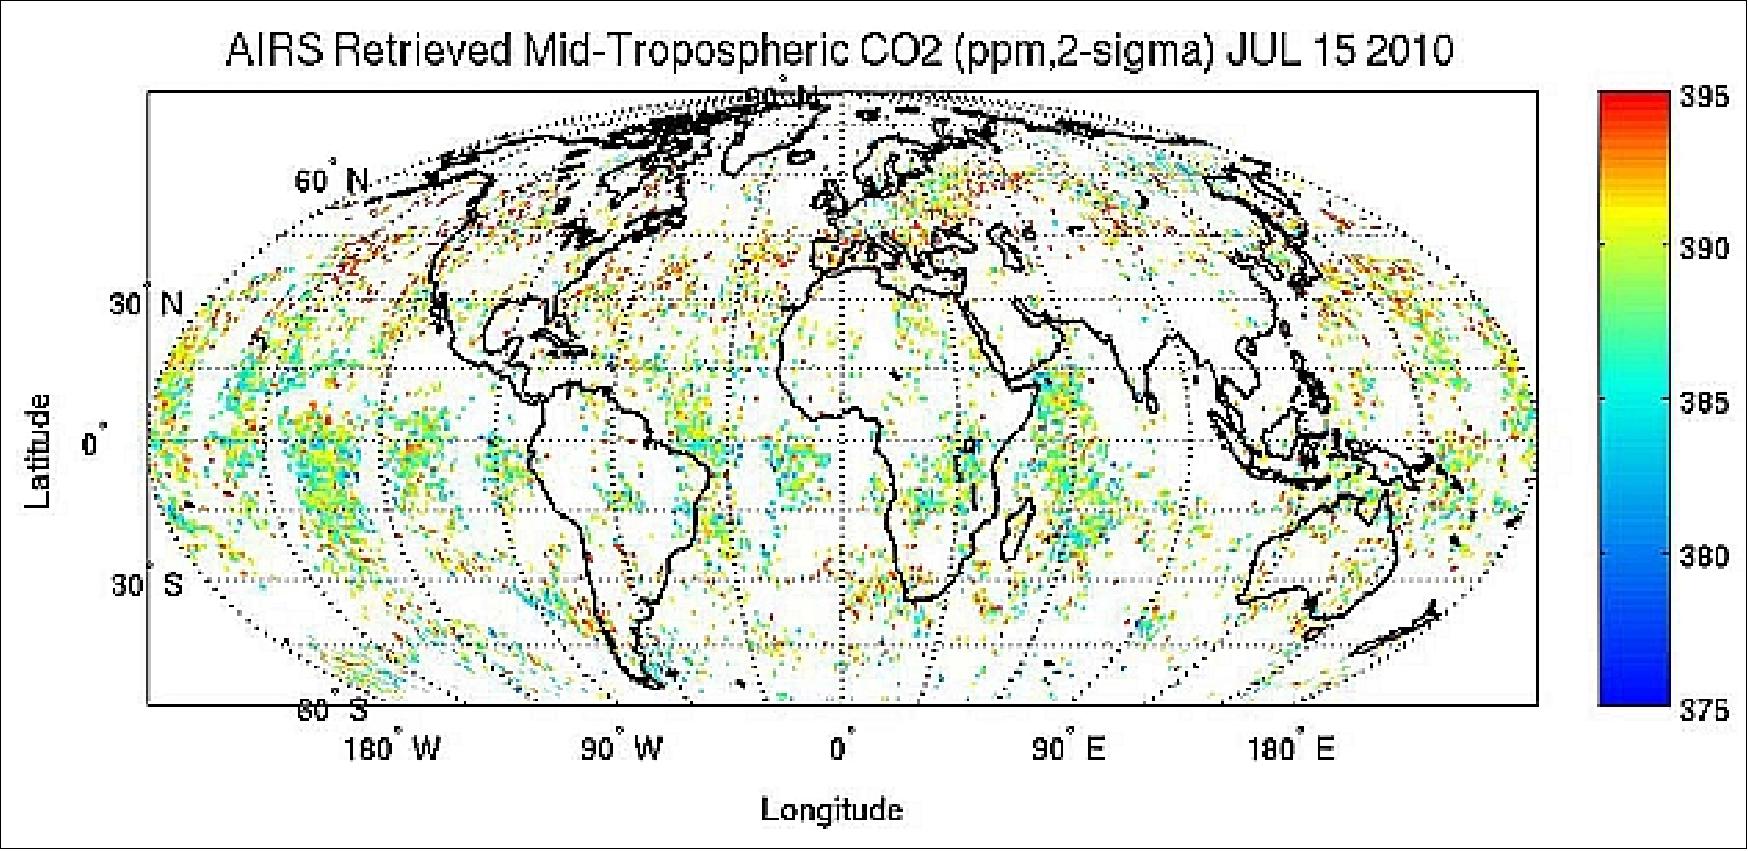 Figure 57: AIRS yields about 15,000 mid-tropospheric CO2 measurements per day (image credit: NASA/JPL)